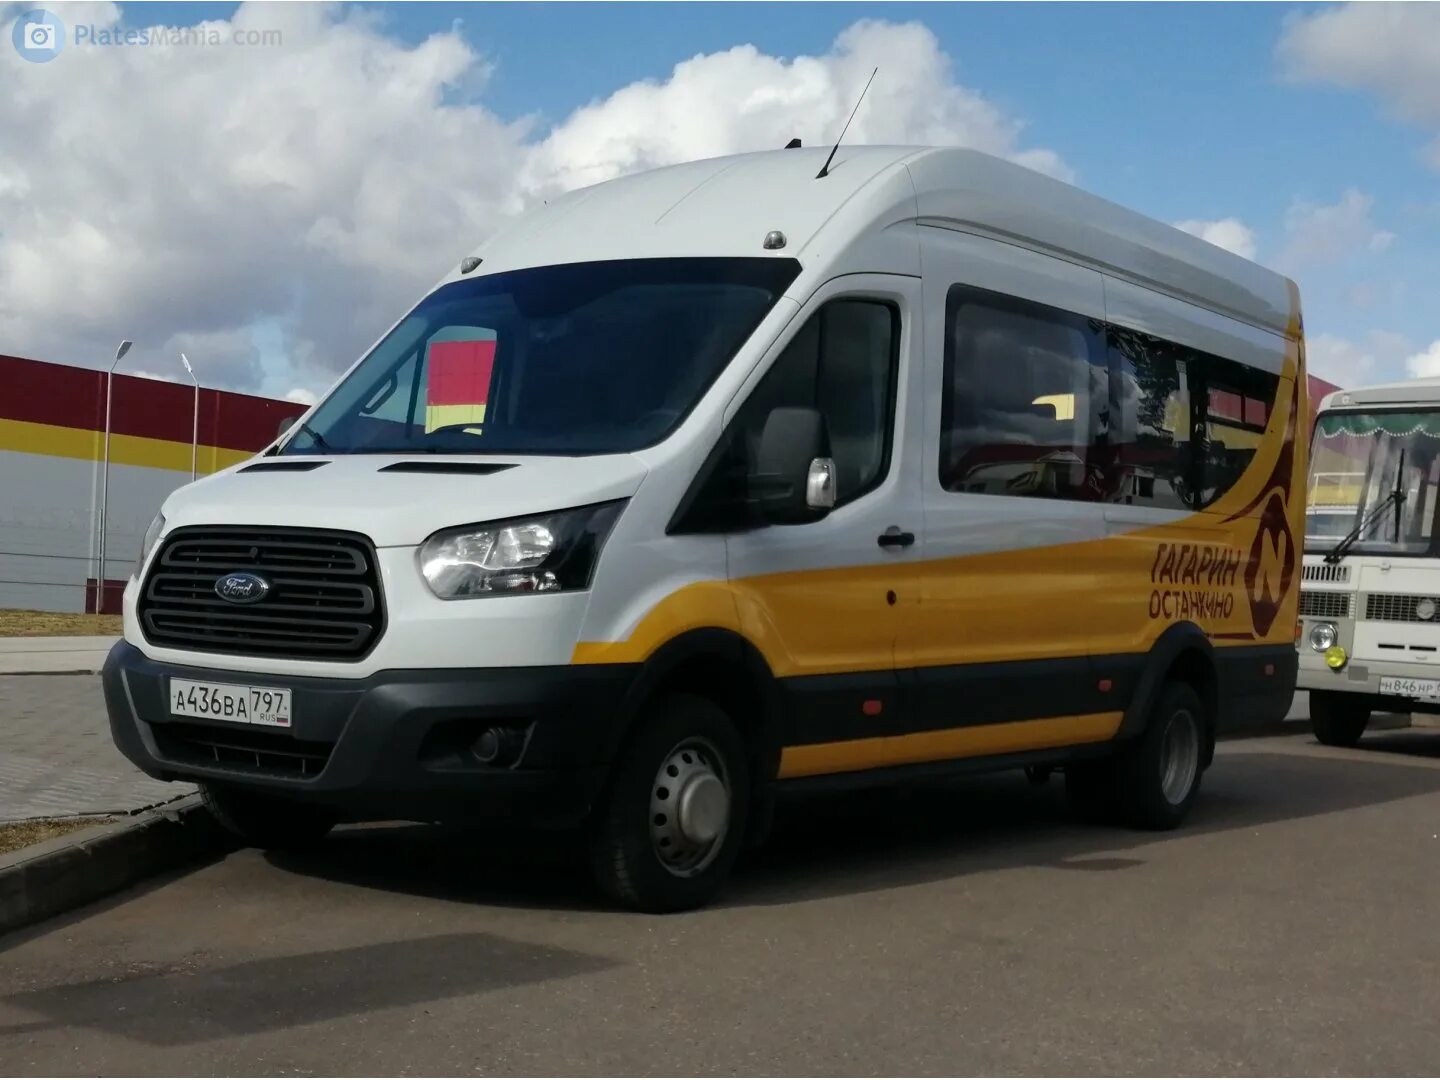 Бел транзит. Ford Transit, p 625 EO 797. Ford Transit u0125. Ford Transit, e 660 Ey 797. Белый Ford Transit, a 645 km 797.